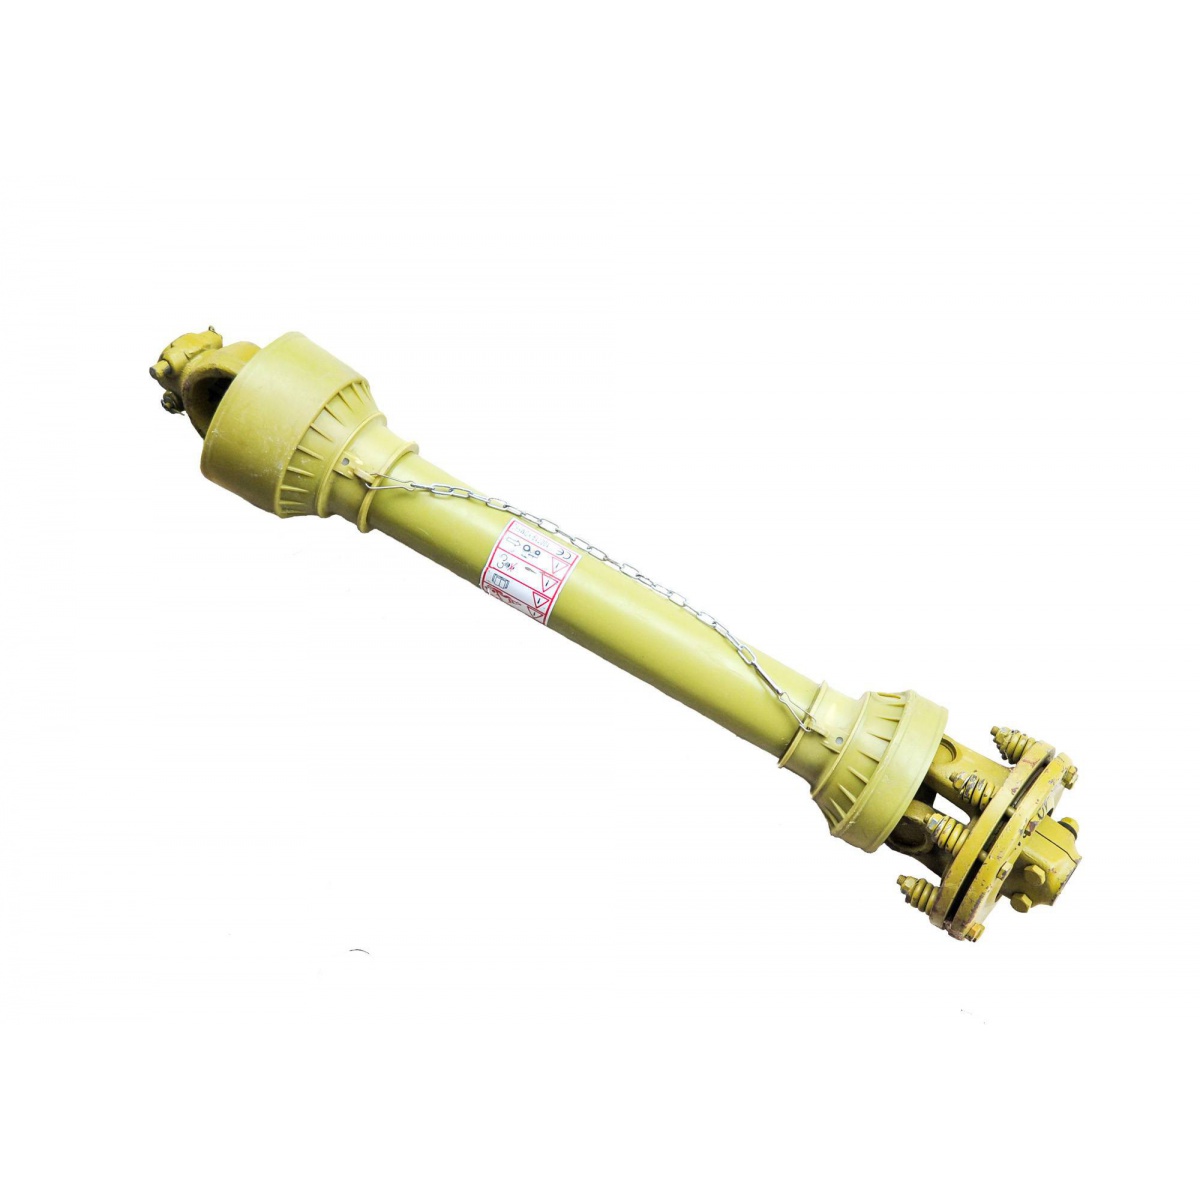 PTO shaft with clutch 07B - 90 cm / up to 105 HP